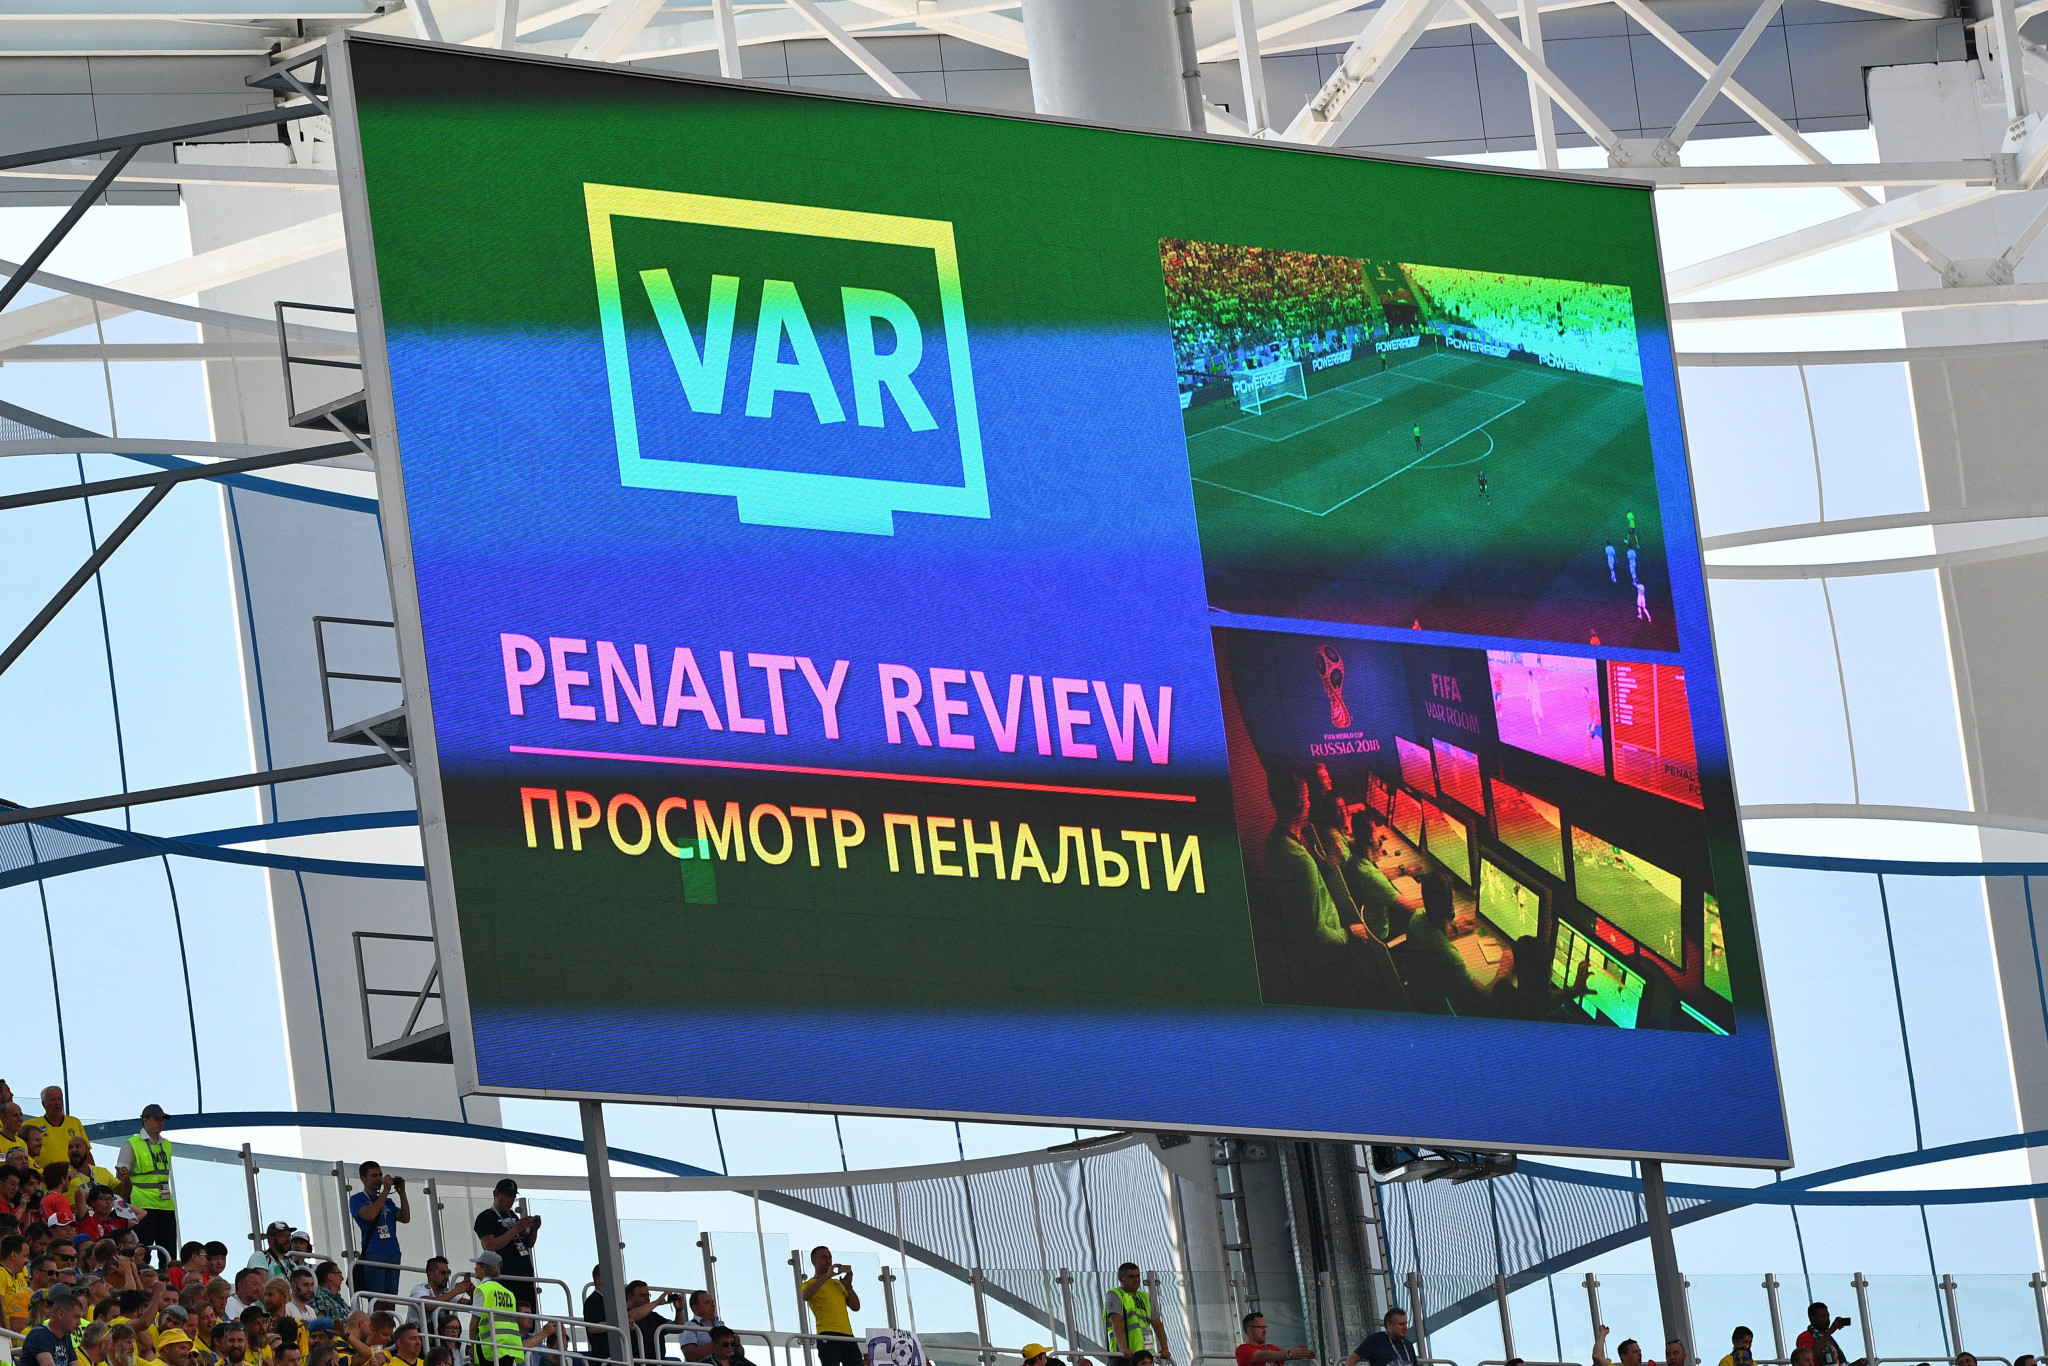 VAR technology was used once again to determine the Sweden penalty ©Getty Images